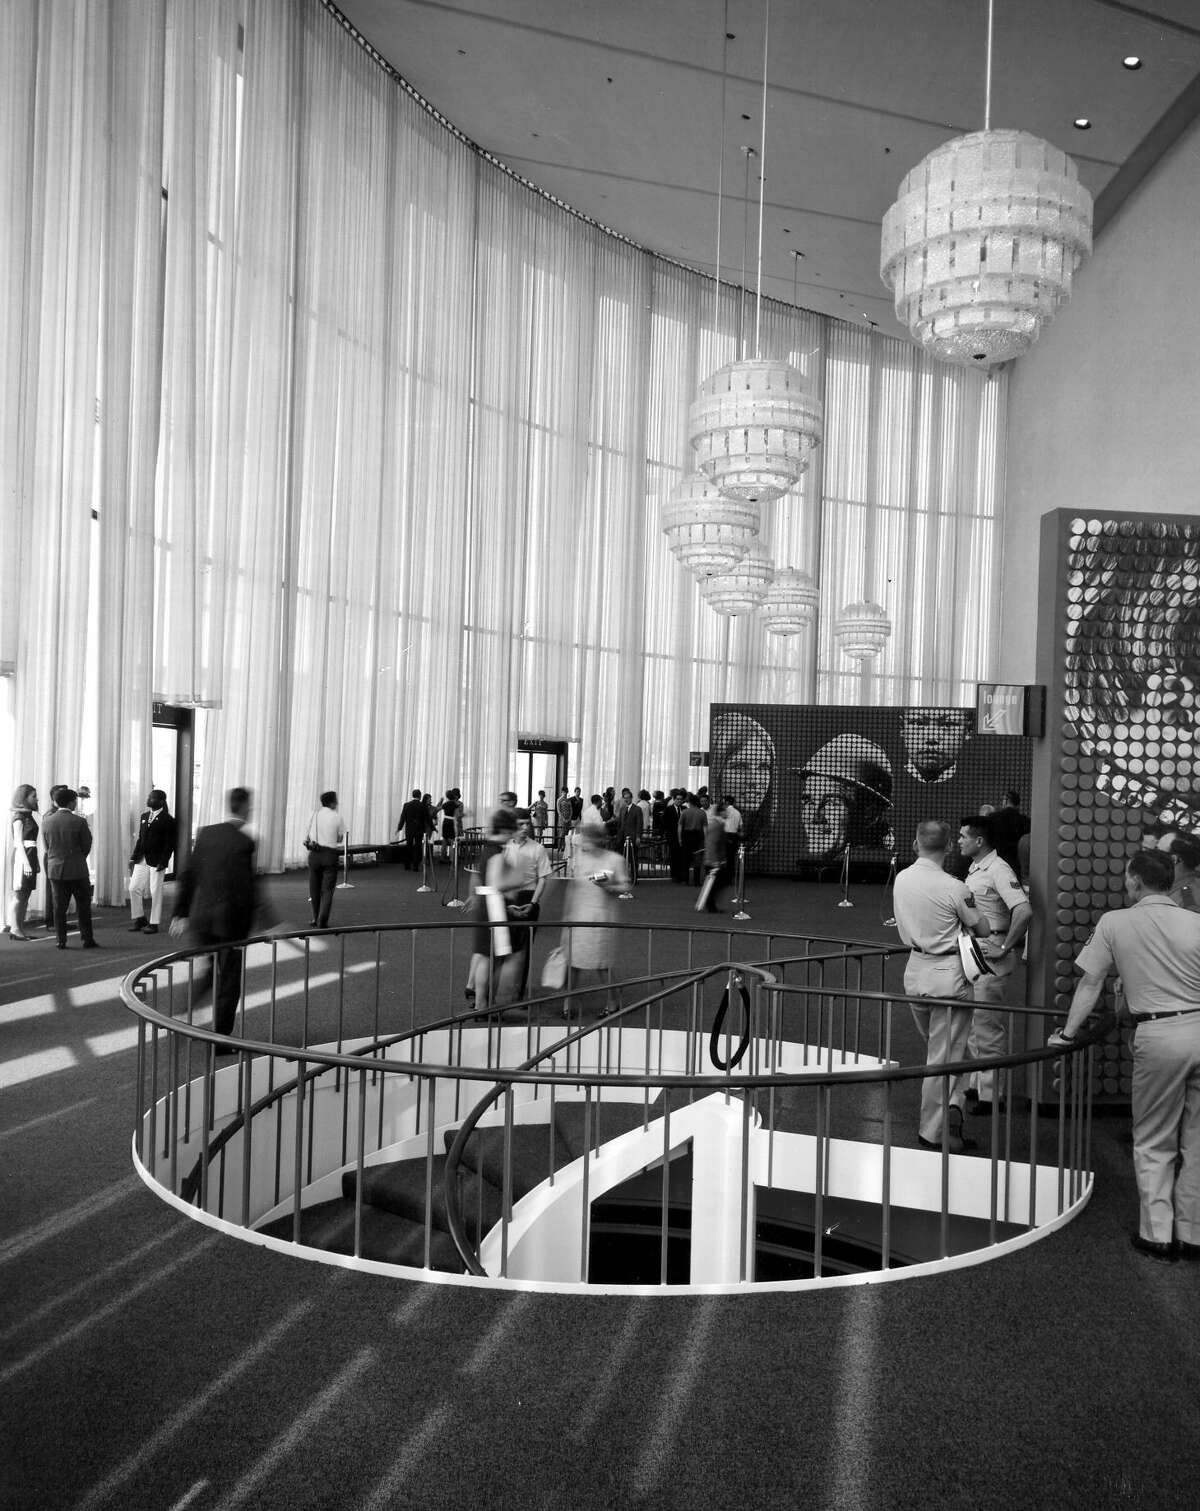 During HemisFair ’68, the space-age Confluence Theater had numerous large displays of art in the lobby. Inside, there were three separate theaters that would merge into one during the showing of the controversial film, “US,” specially commissed for the world’s fair in San Antonio. The building later became the John H. Wood Jr. U.S. Courthouse